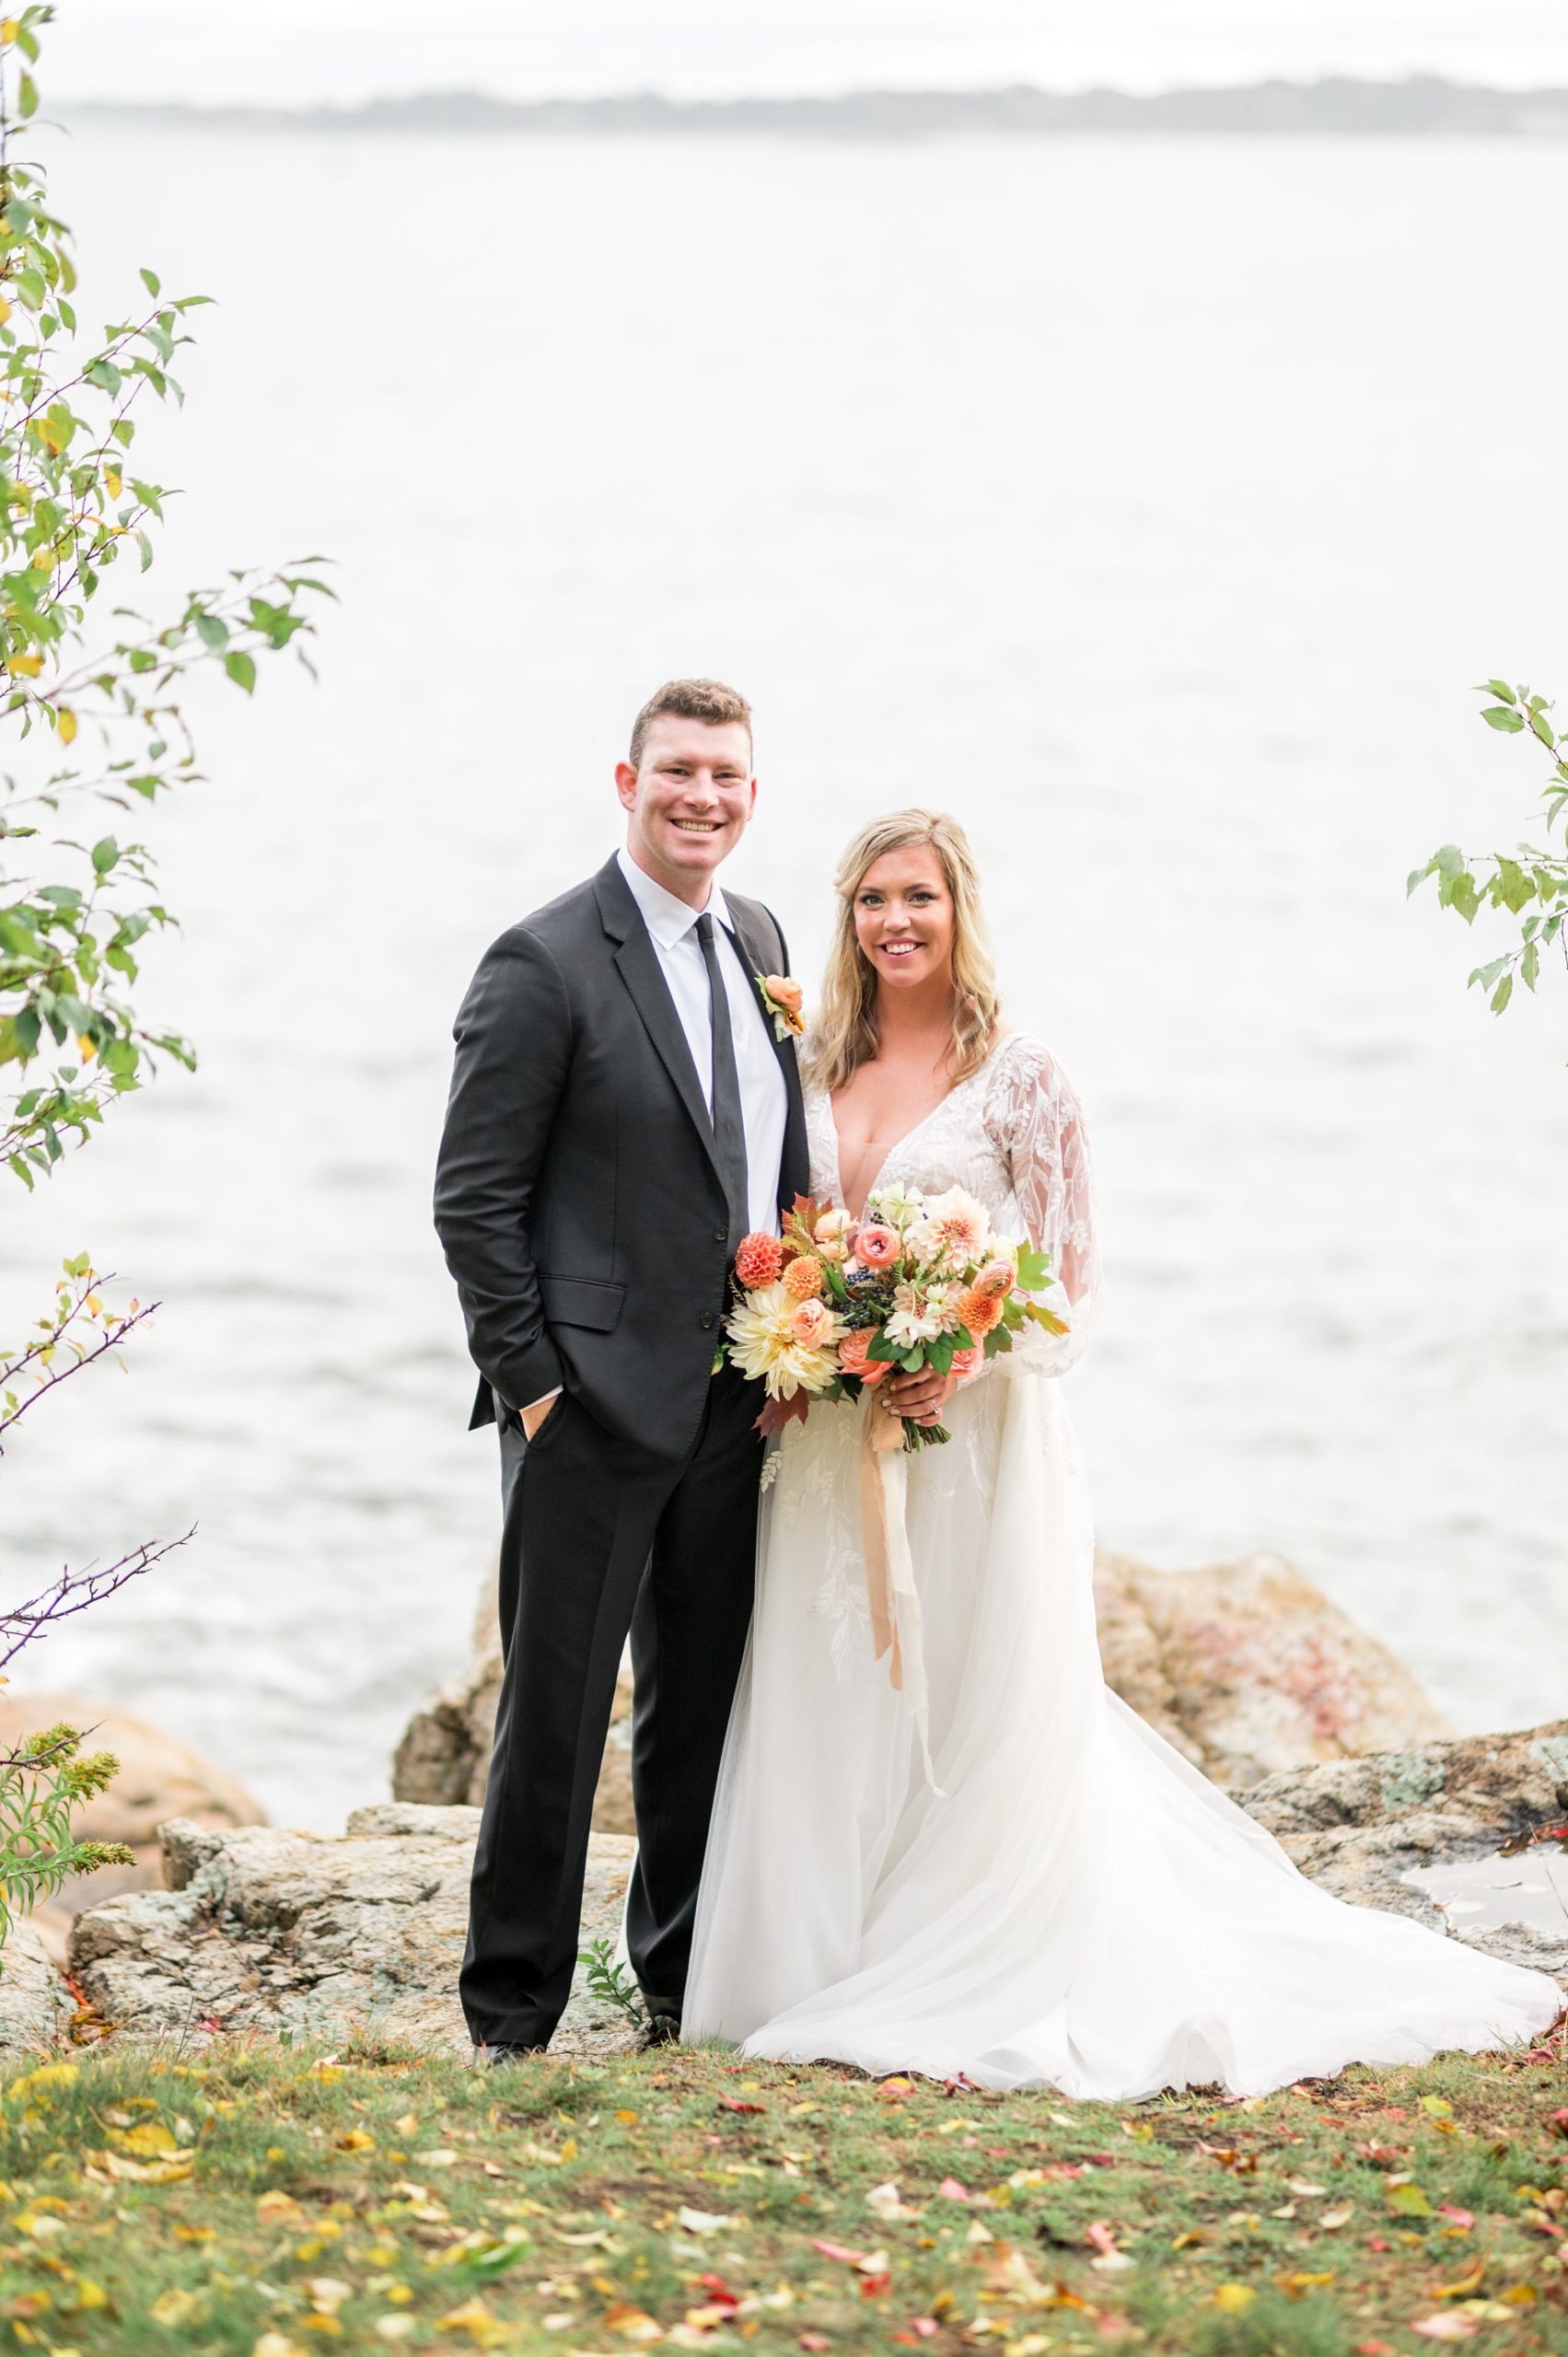 Fall wedding at Misselwood Events at Endicott College